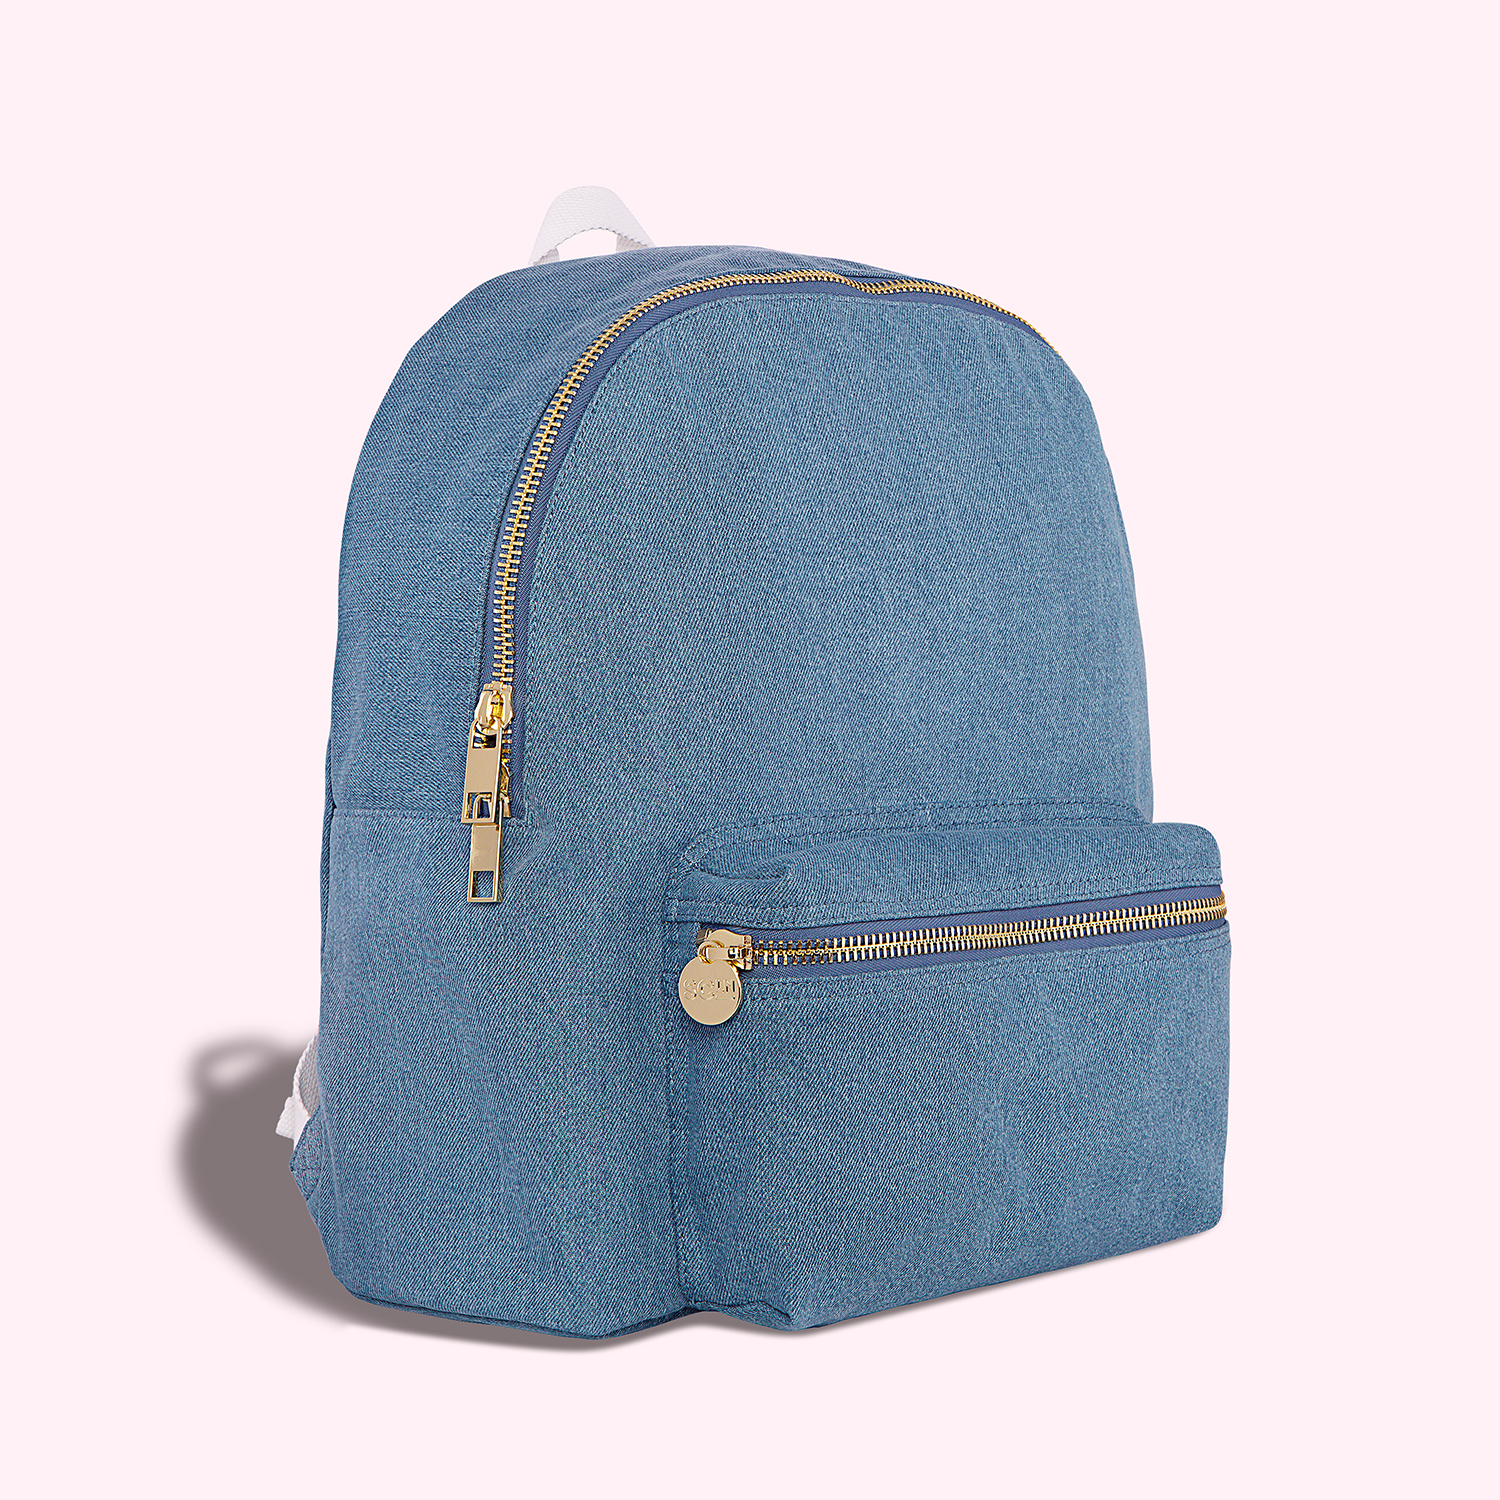 Moisture Proof Very Spacious Dark Blue Denim School Backpack Bags With  Zipper Closure Style at Best Price in Kanpur | Goel Trading Co.